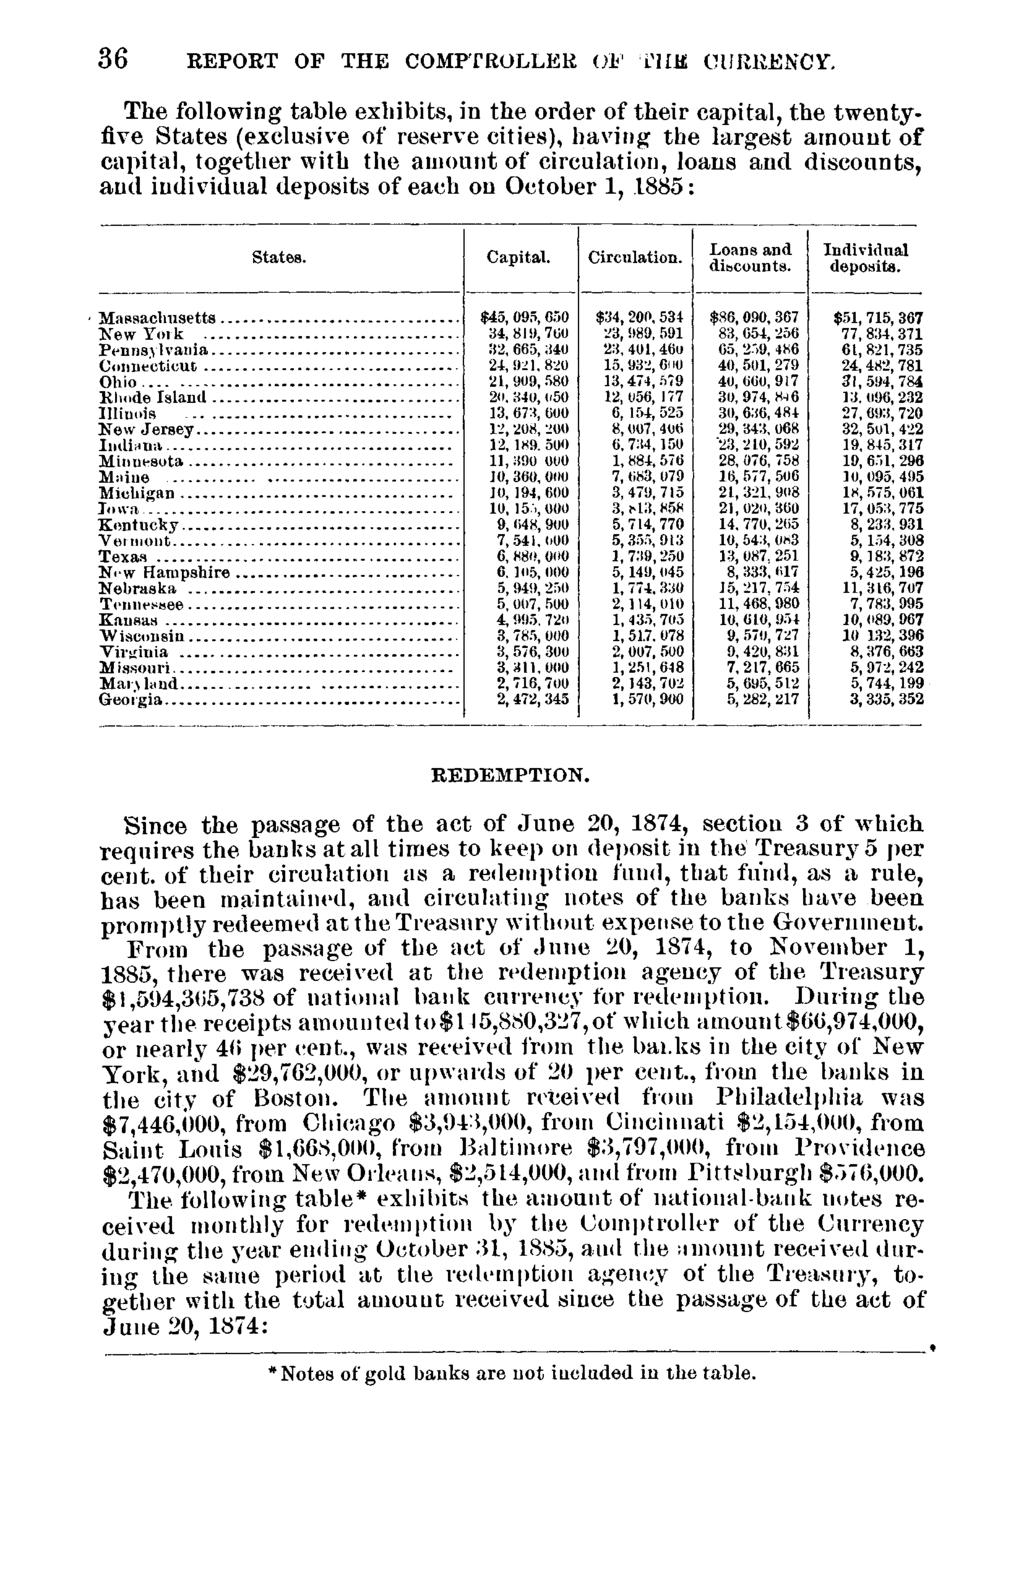 36 REPORT OF THE COMPTROLLER OF THJ* CURRENCY The following table exhibits, in the order of their capital, the twentyfive States (exclusive of reserve cities), having the largest amount of capita],